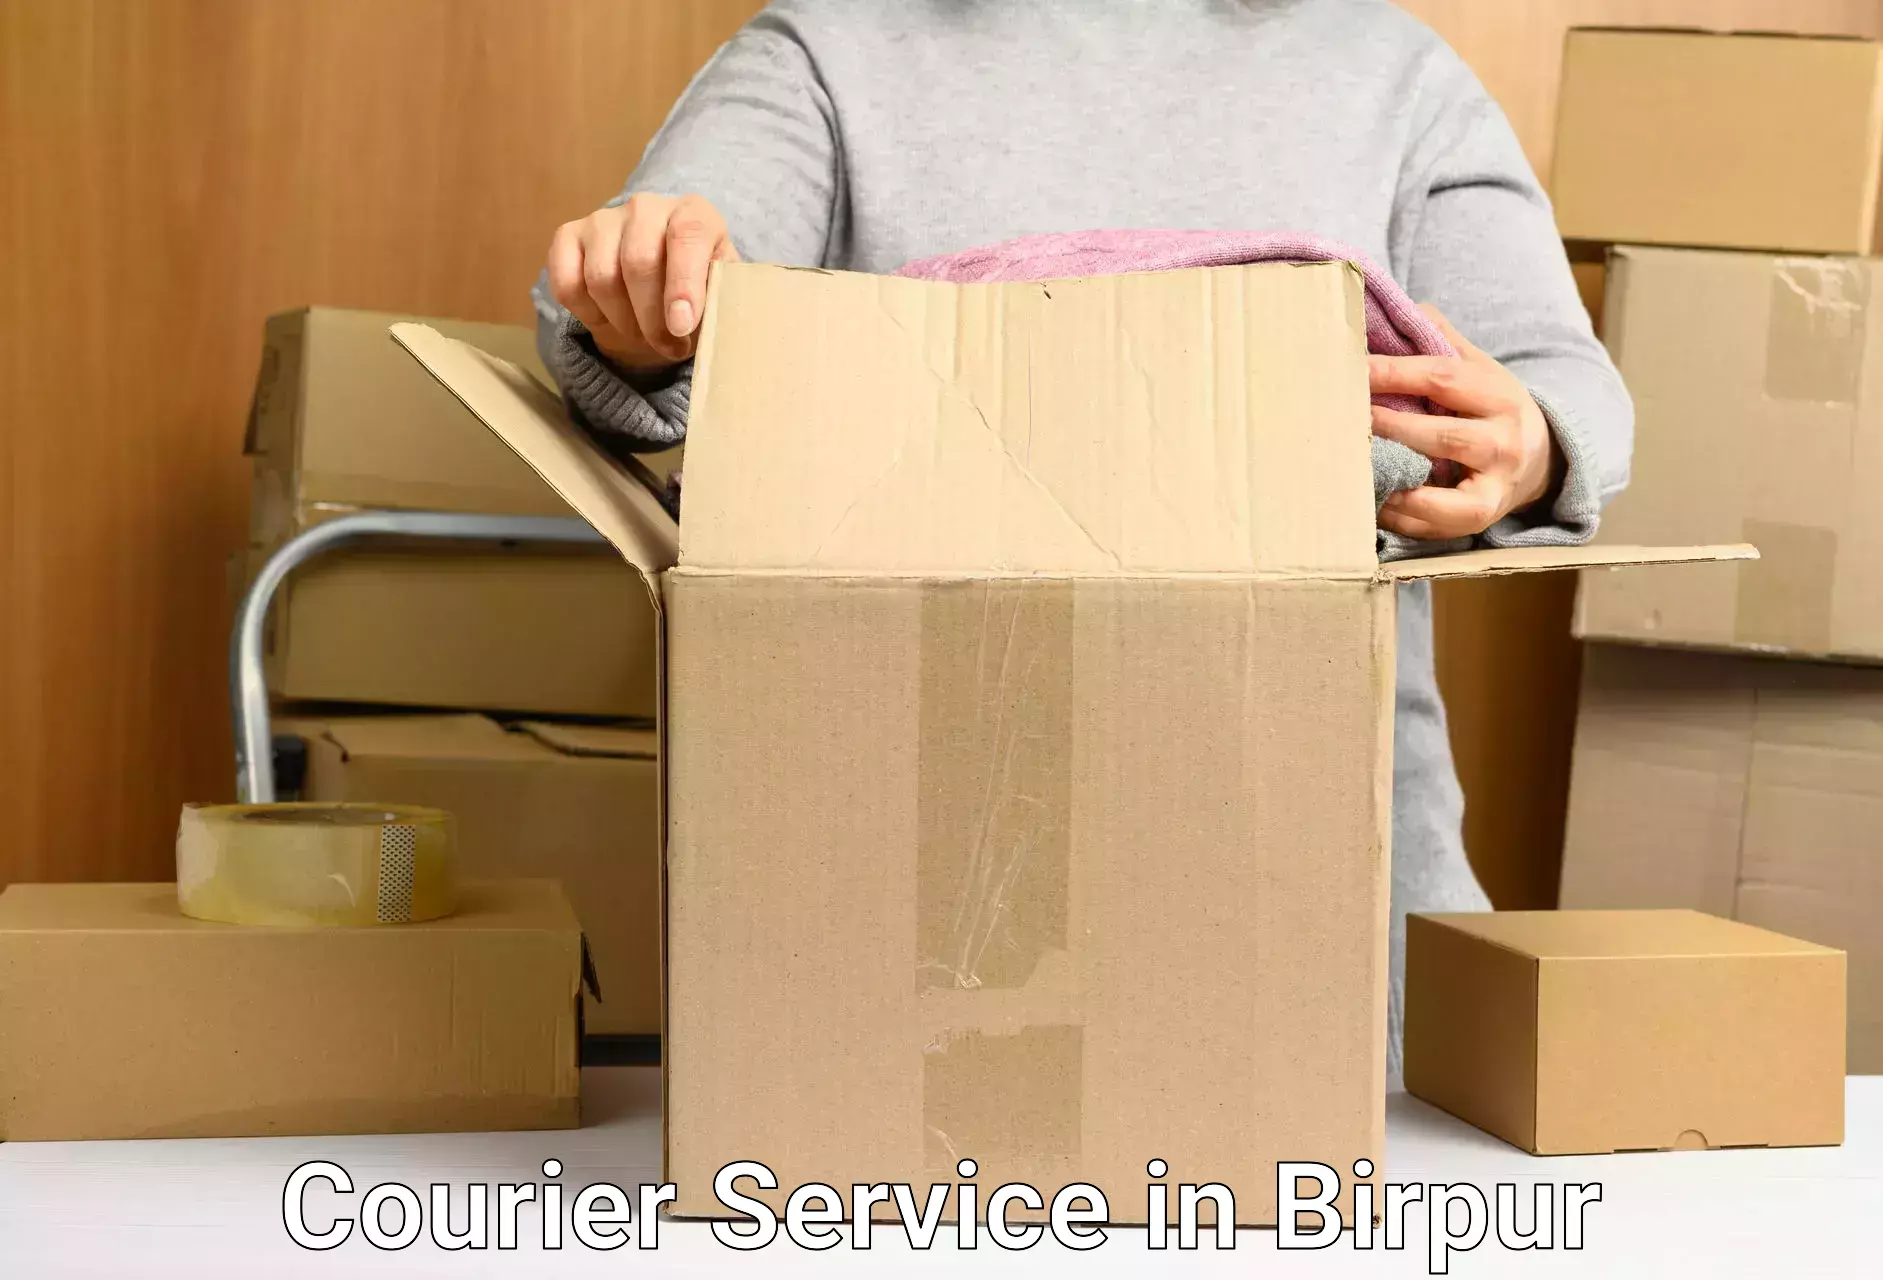 Parcel service for businesses in Birpur